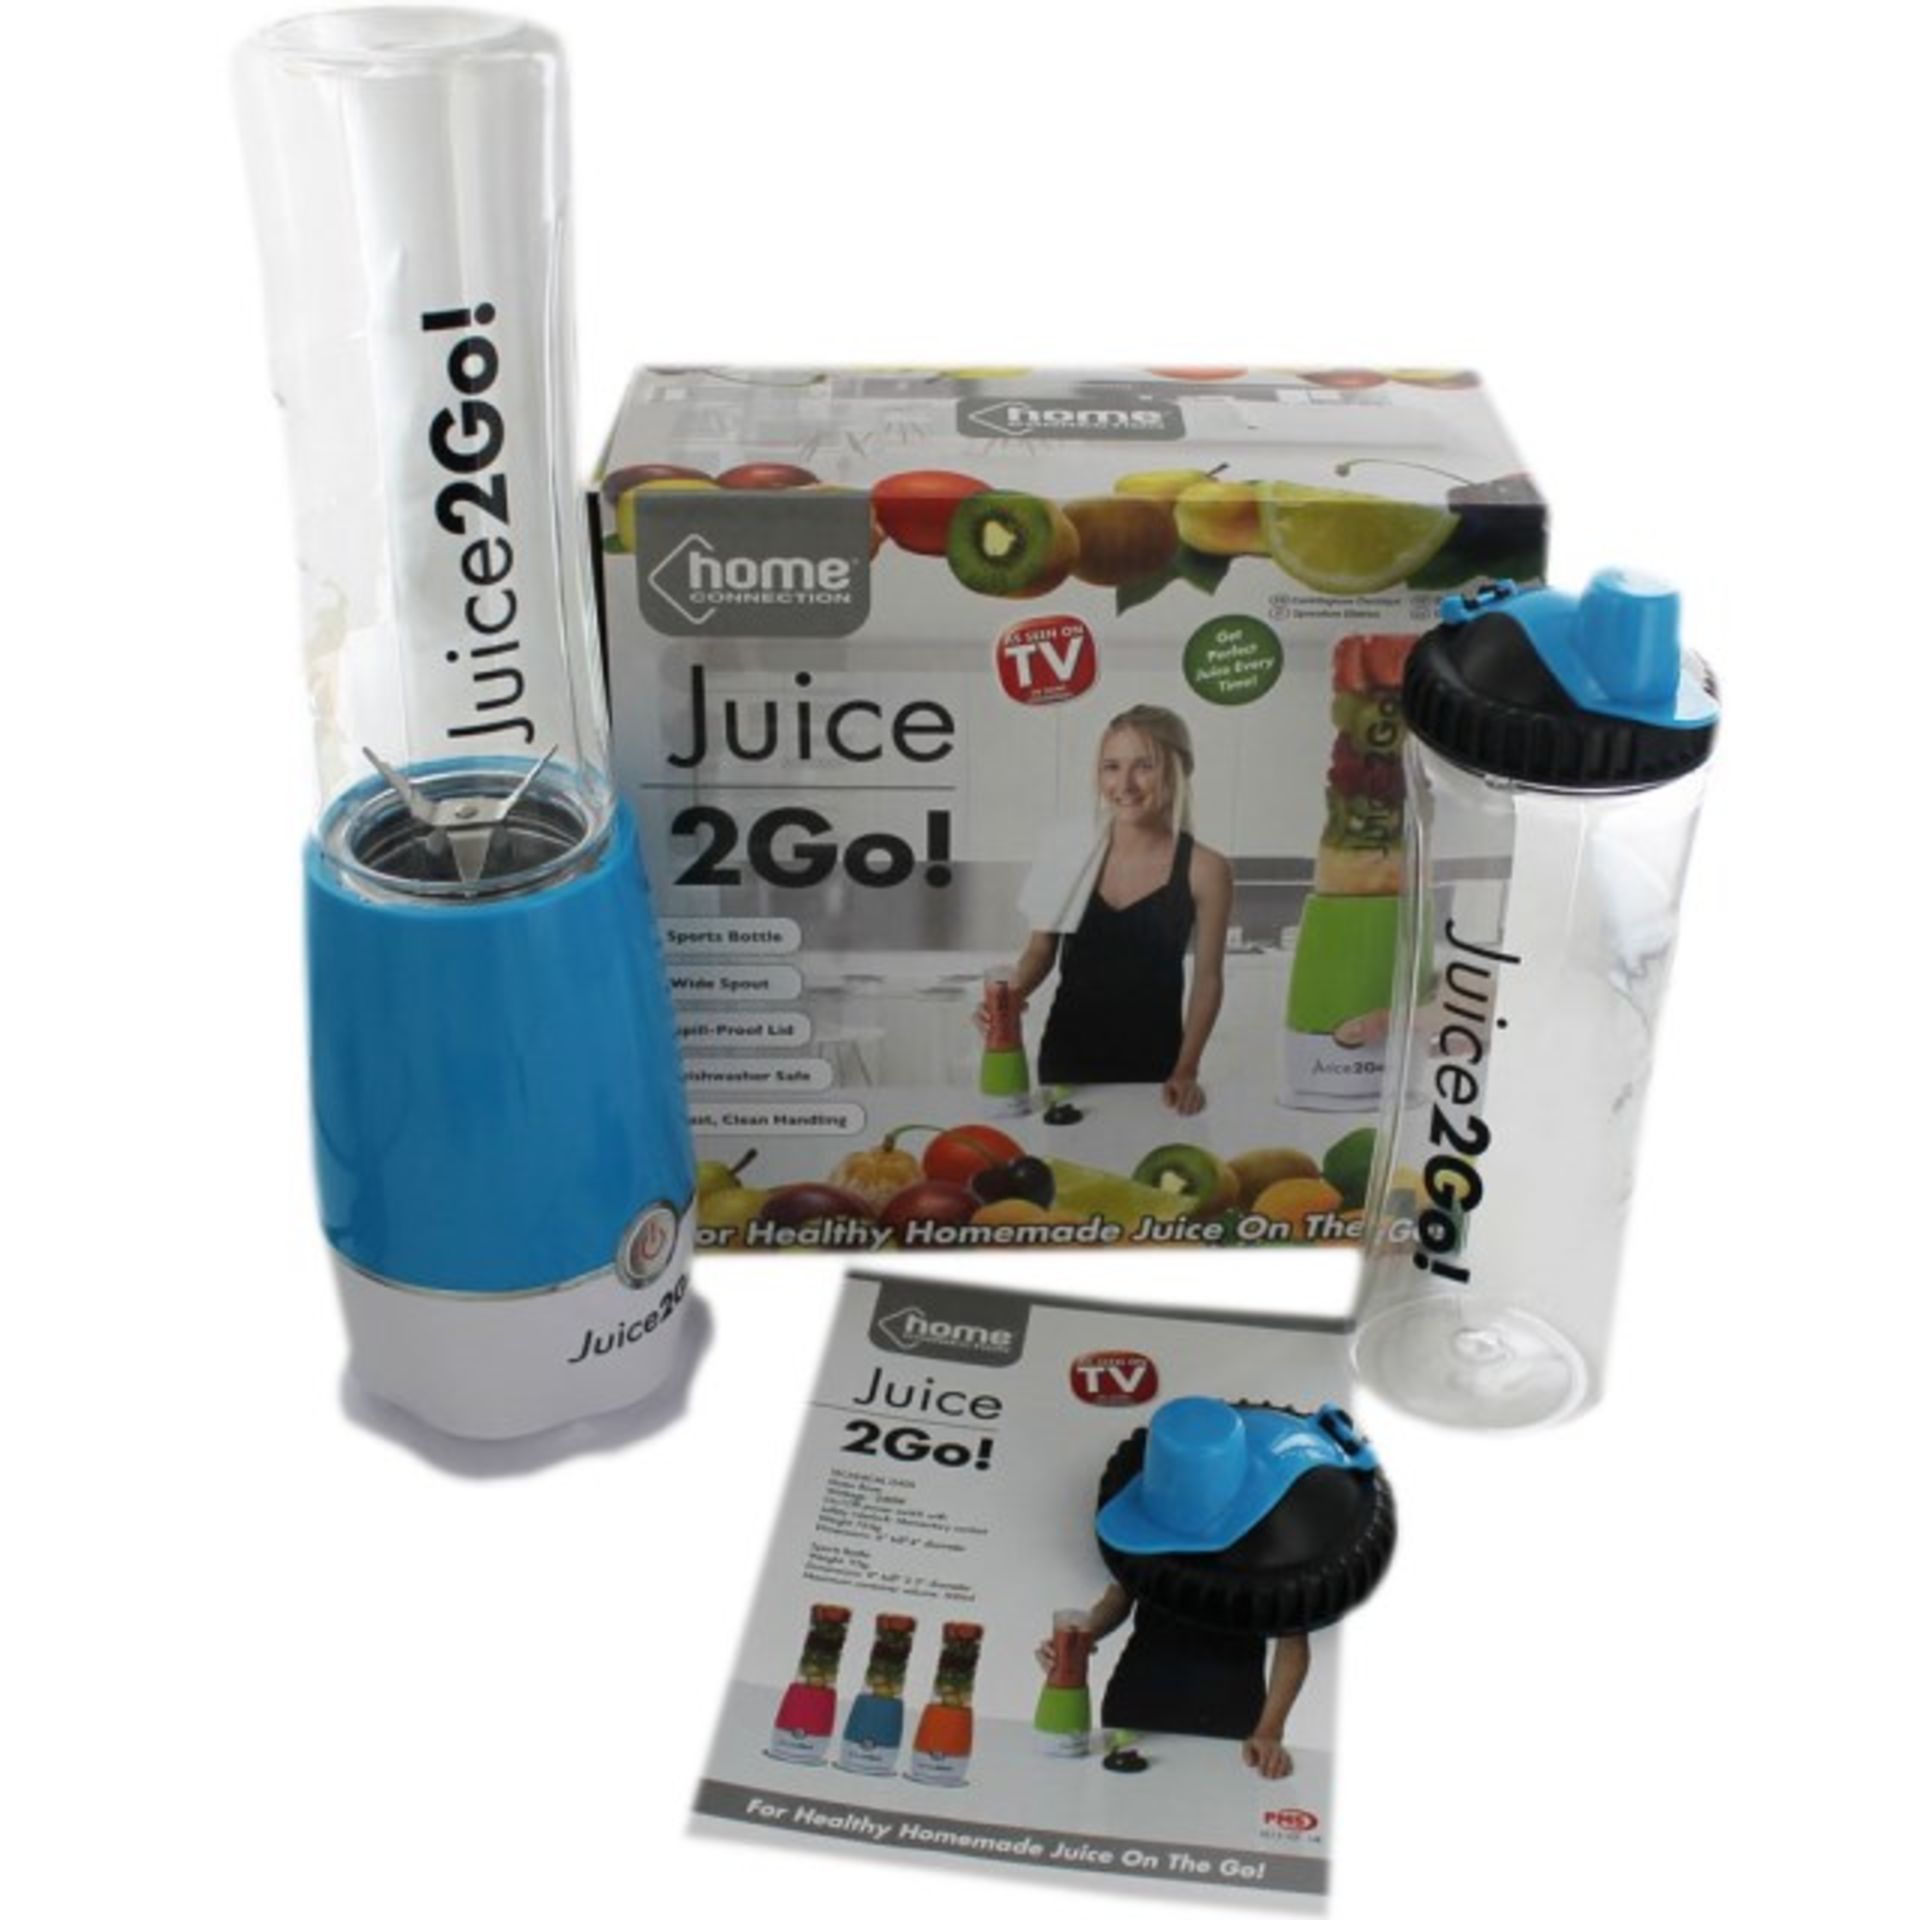 V *TRADE QTY* Brand New Juice To Go! Electric Juicer With Sports Bottle - Wide Spout - Dishwasher